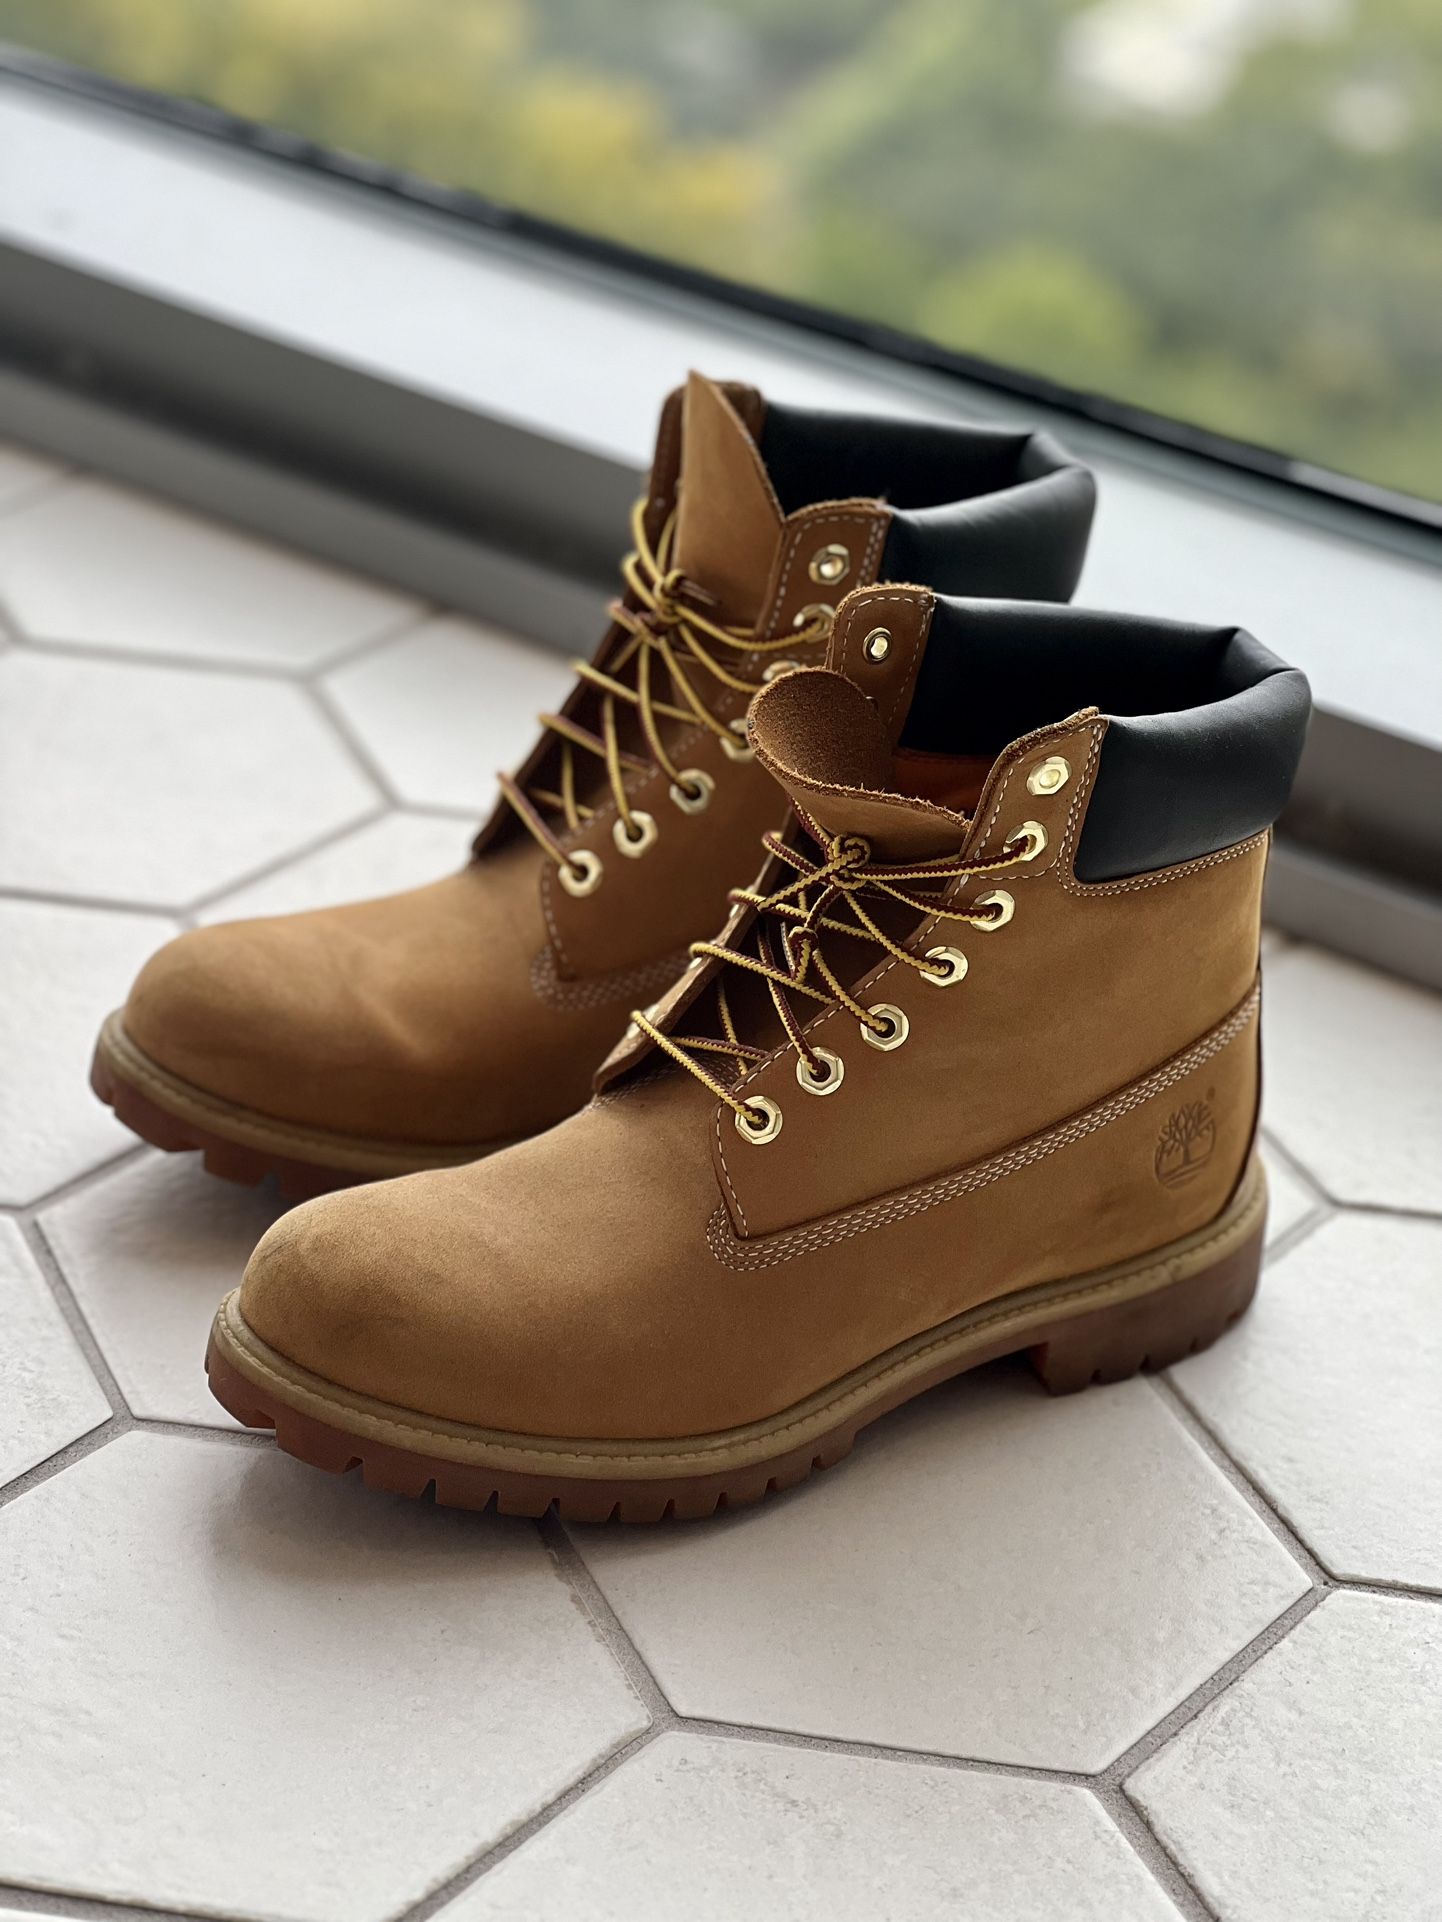 Men’s Wheat Timberland Timbs Boots - Size 10